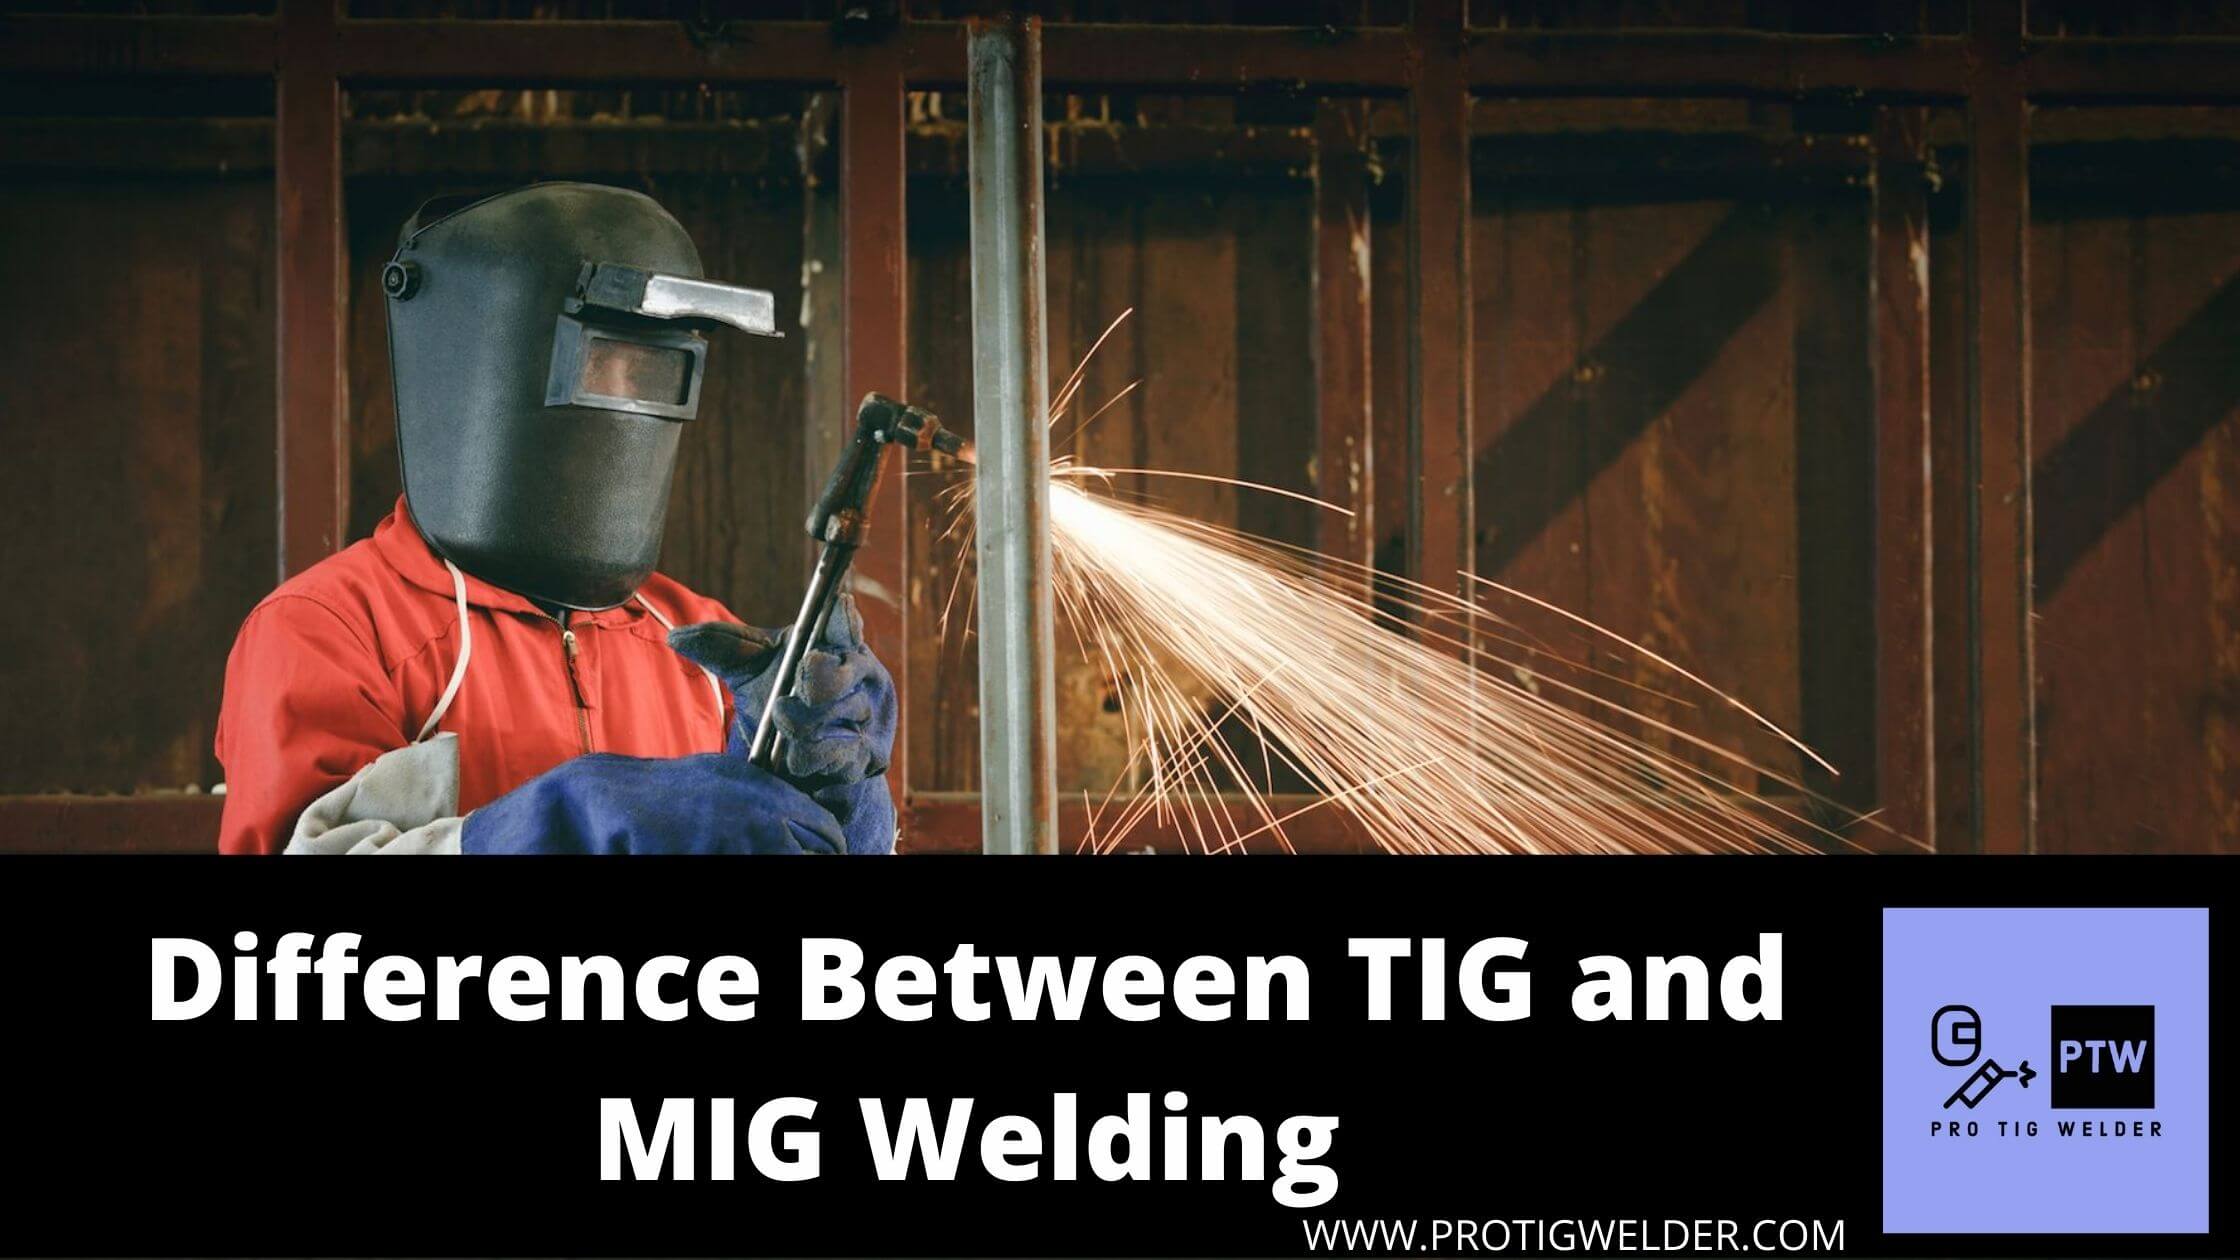 Difference Between TIG and MIG Welding